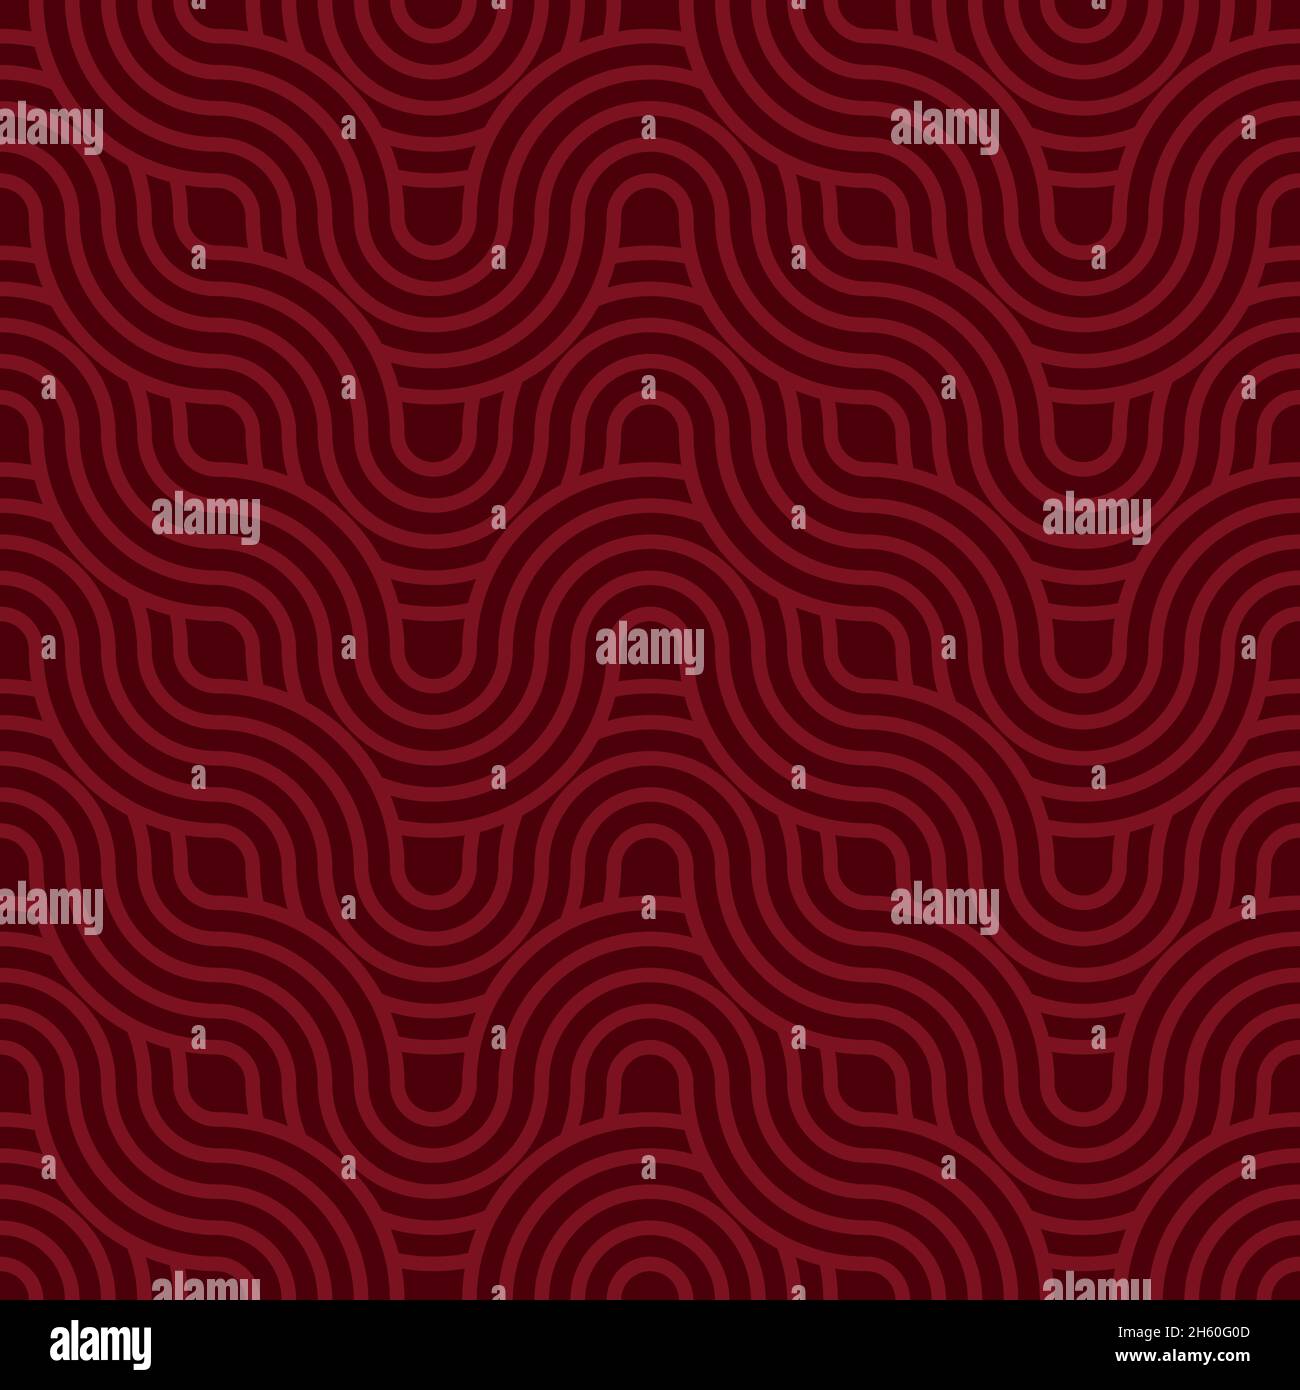 Seamless Pattern design vector with a minimalist style in lines with red and burgundy colors. Background with a red curved lines pattern Stock Vector